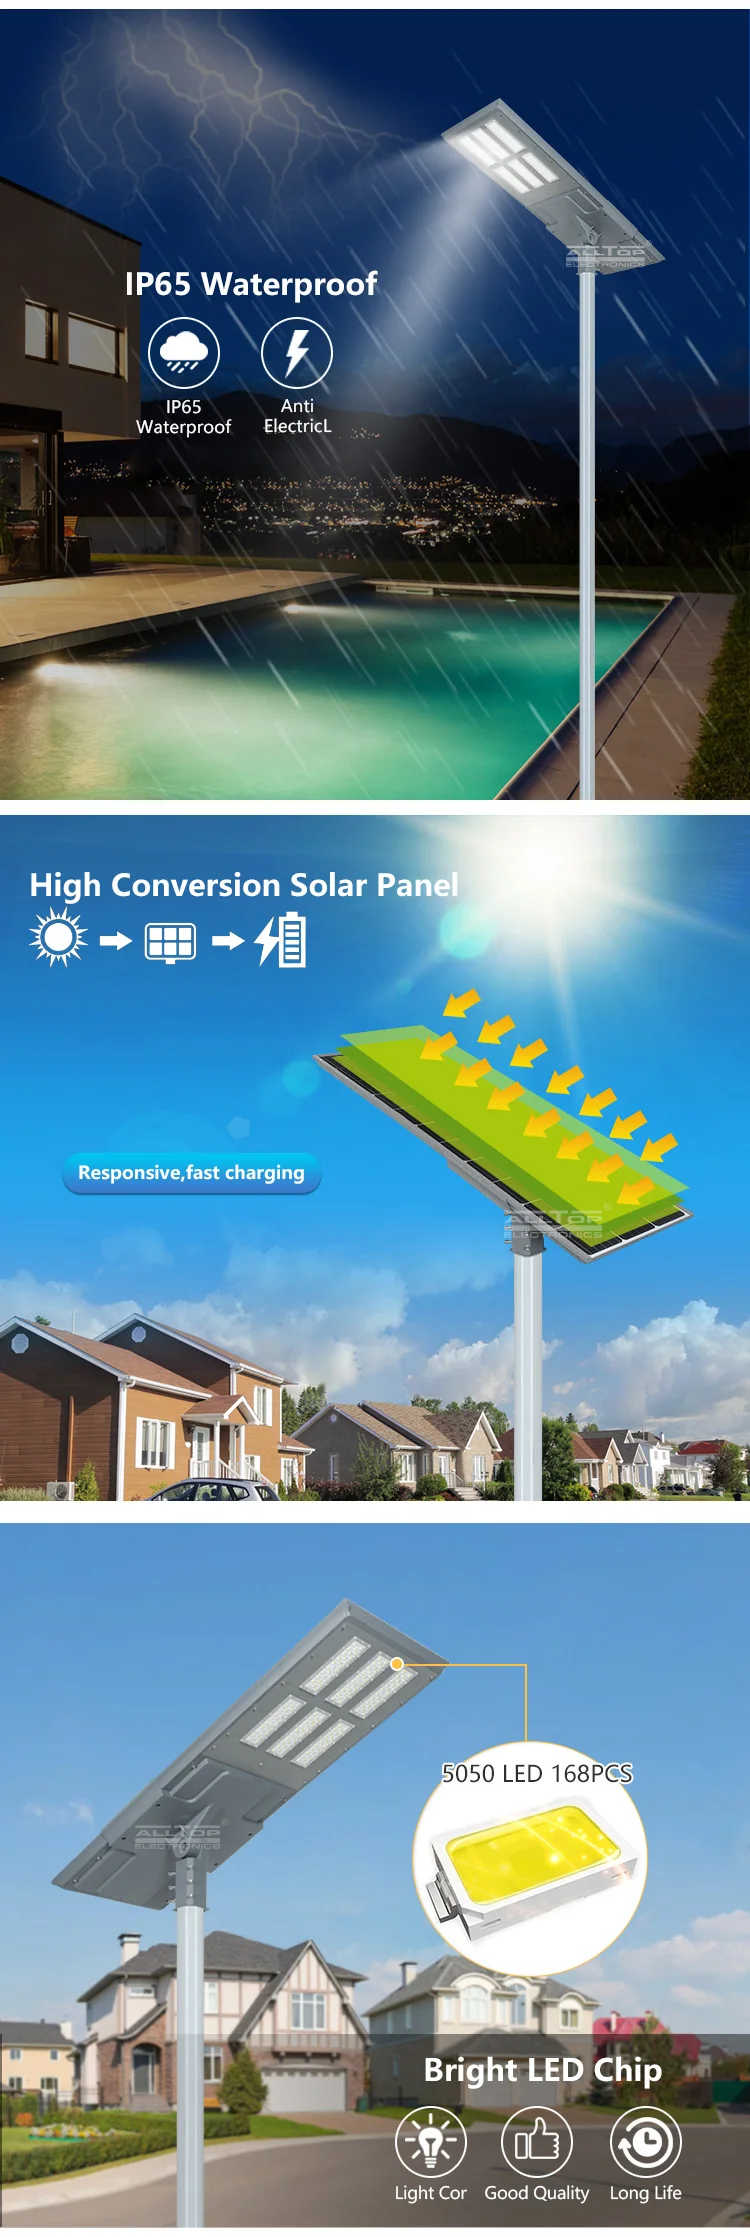 ALLTOP Ultra high quality outdoor waterproof aluminum housing ip65 smd 200w integrated all in one led solar street light